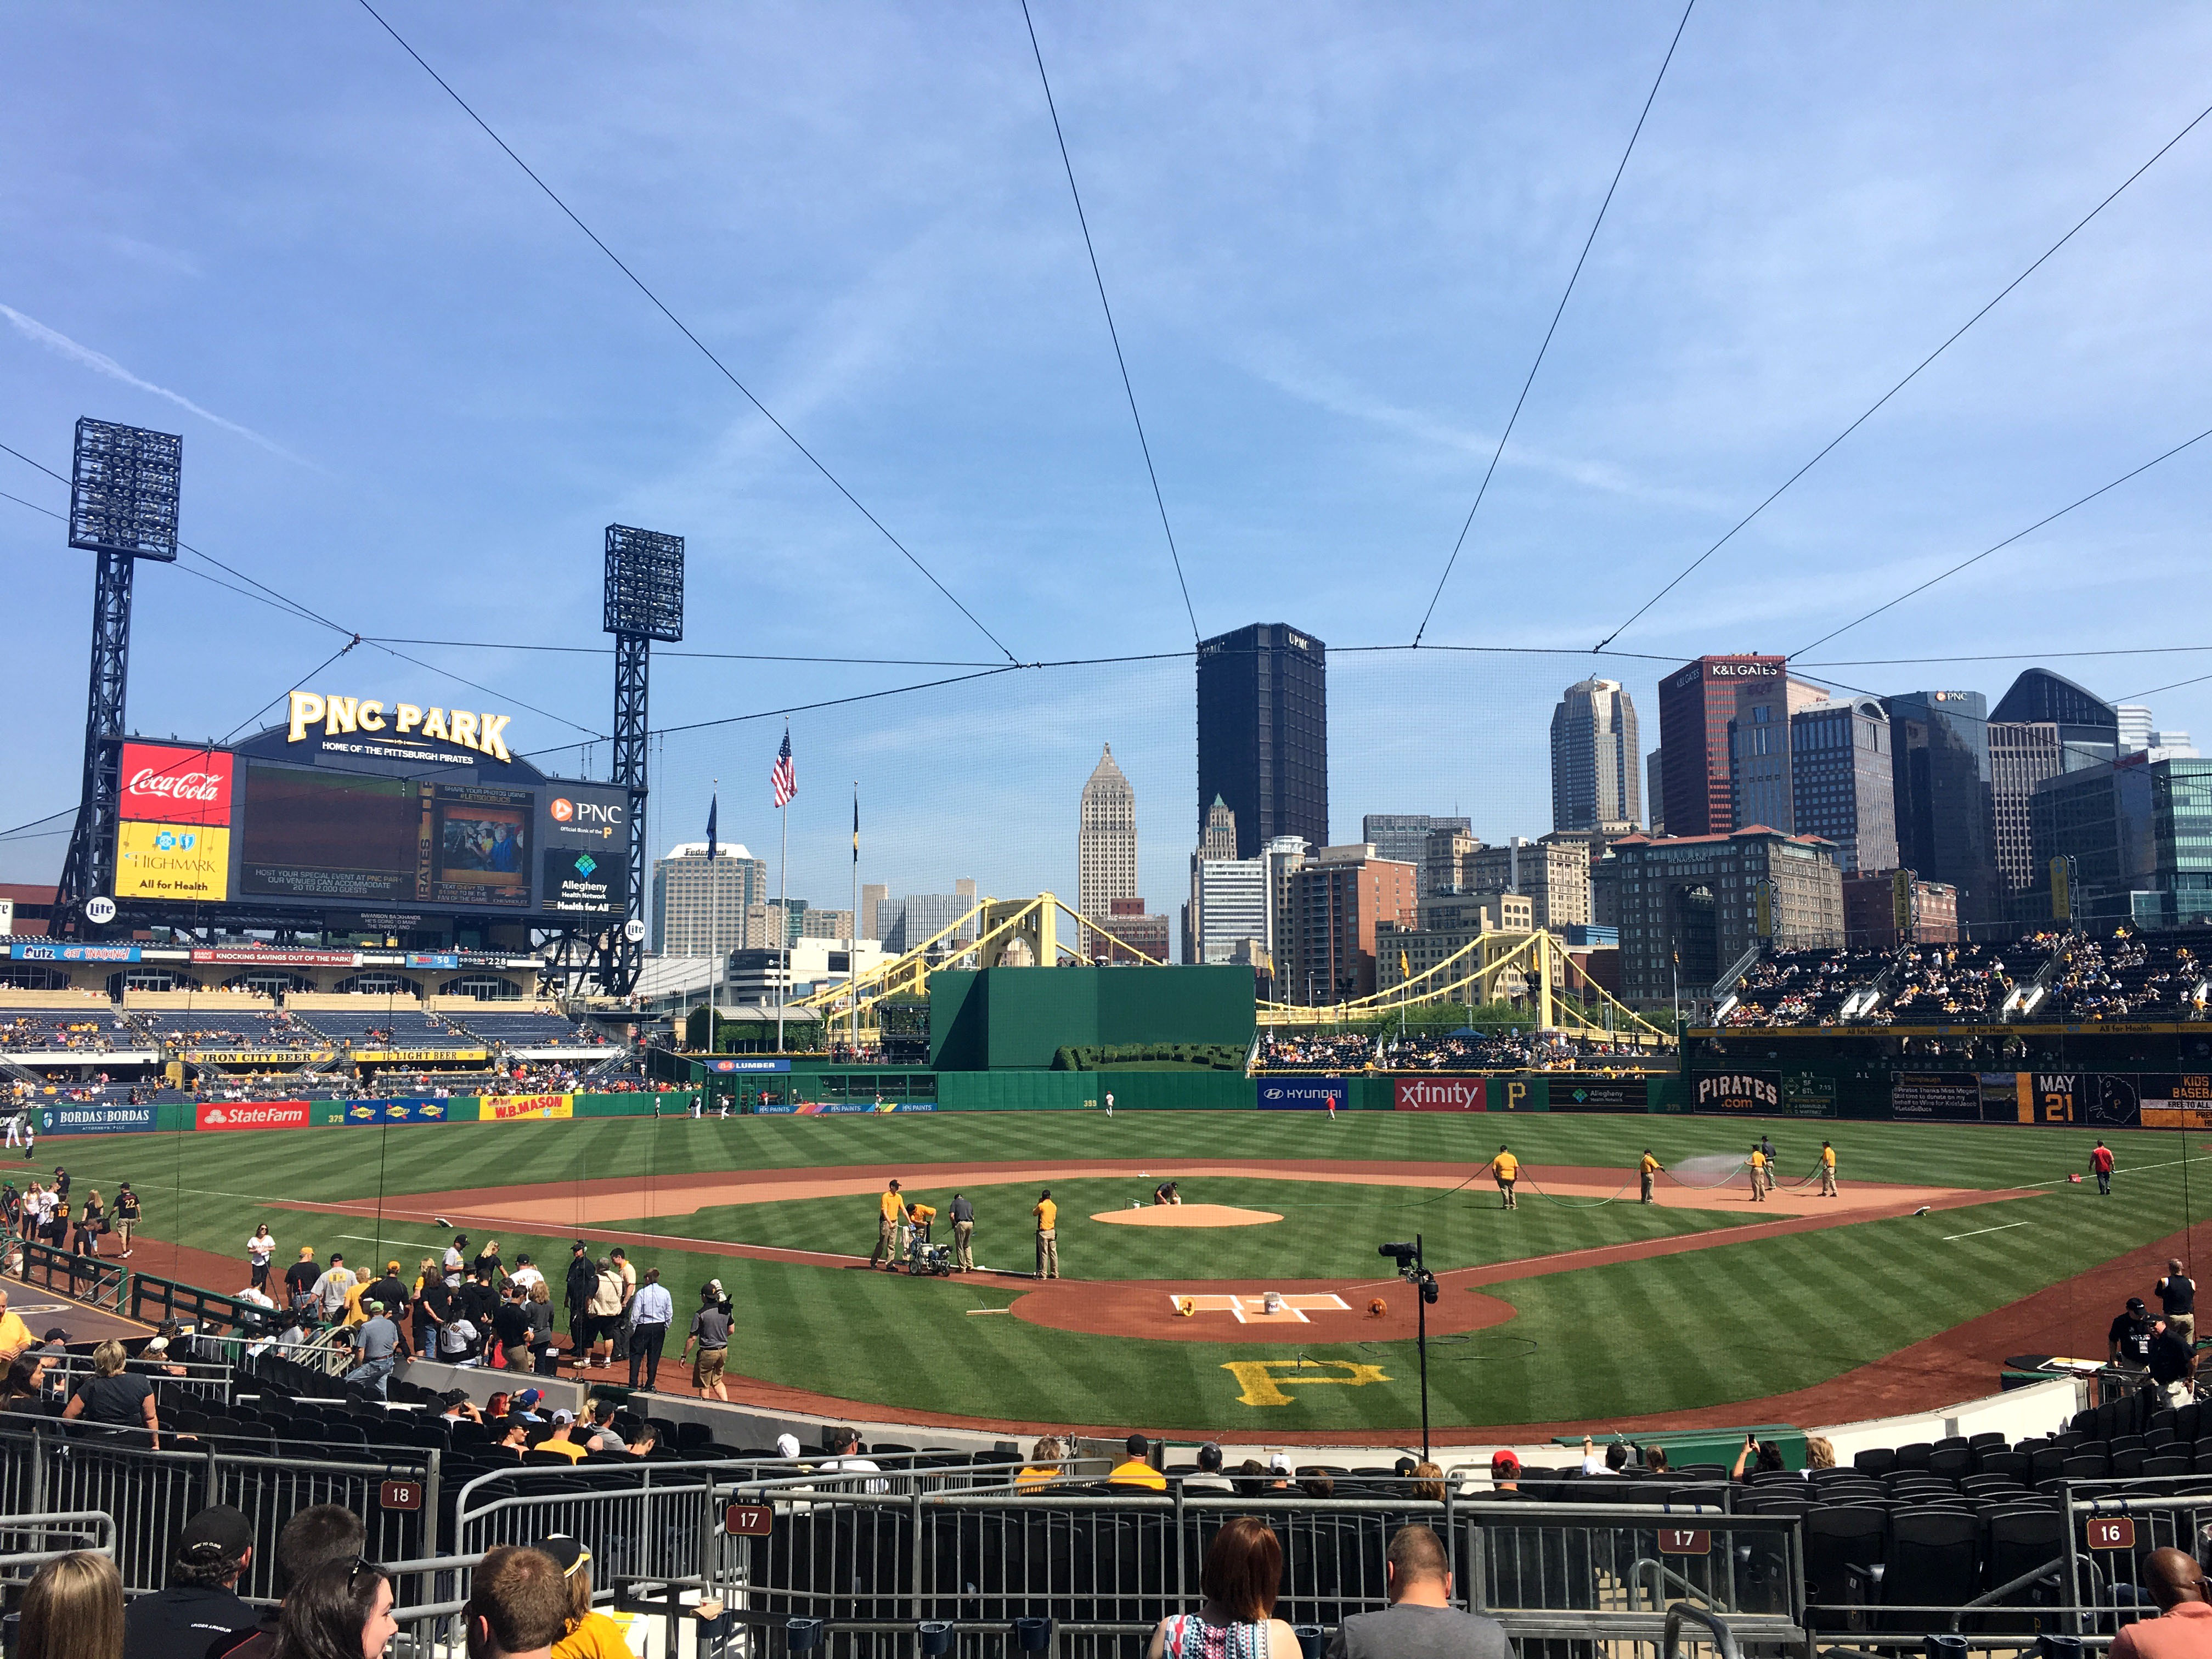  This is the view from PNC Park on Pittsburgh's North Shore where the Pirates play baseball.